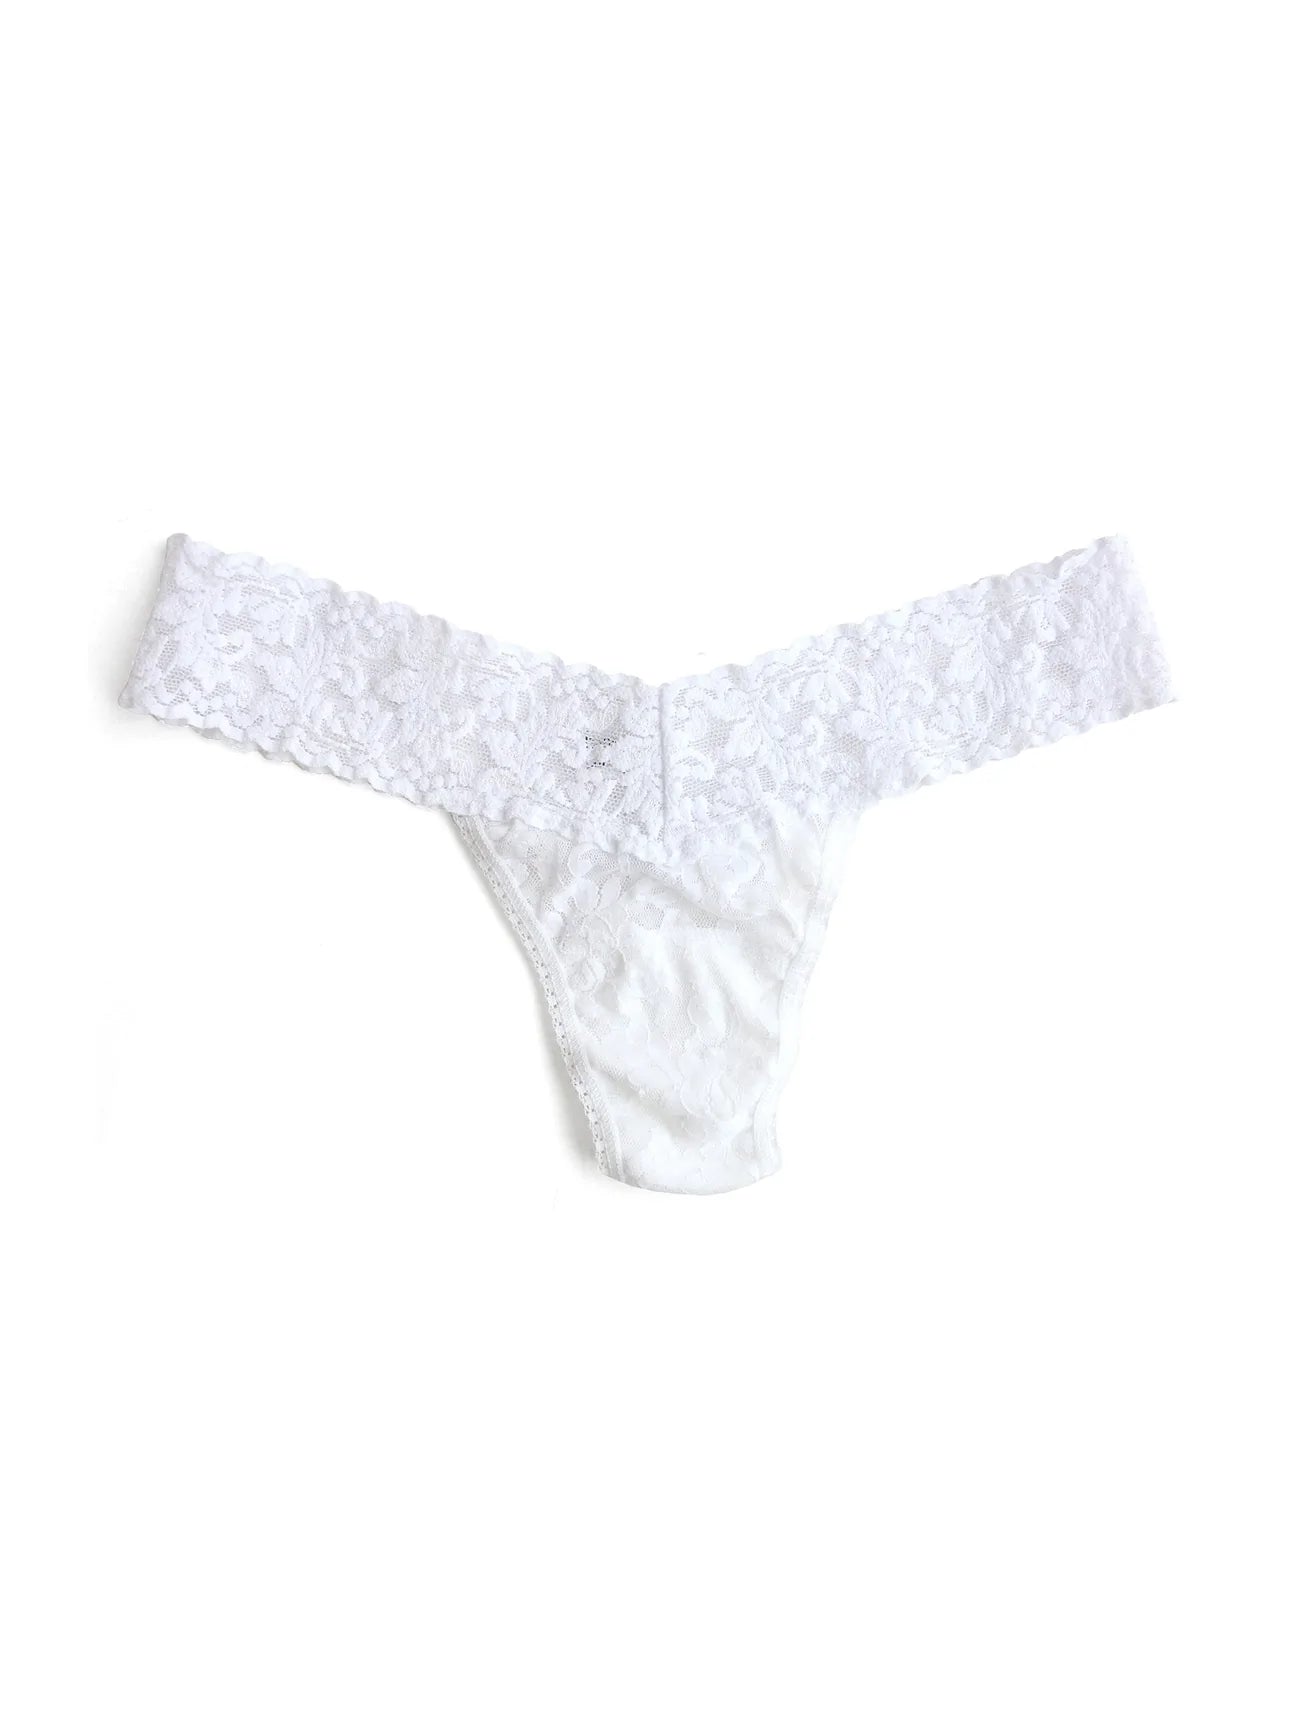 Low Rise Thong by Hanky Panky is a V-Shape Wonder in Lace | BraTopia